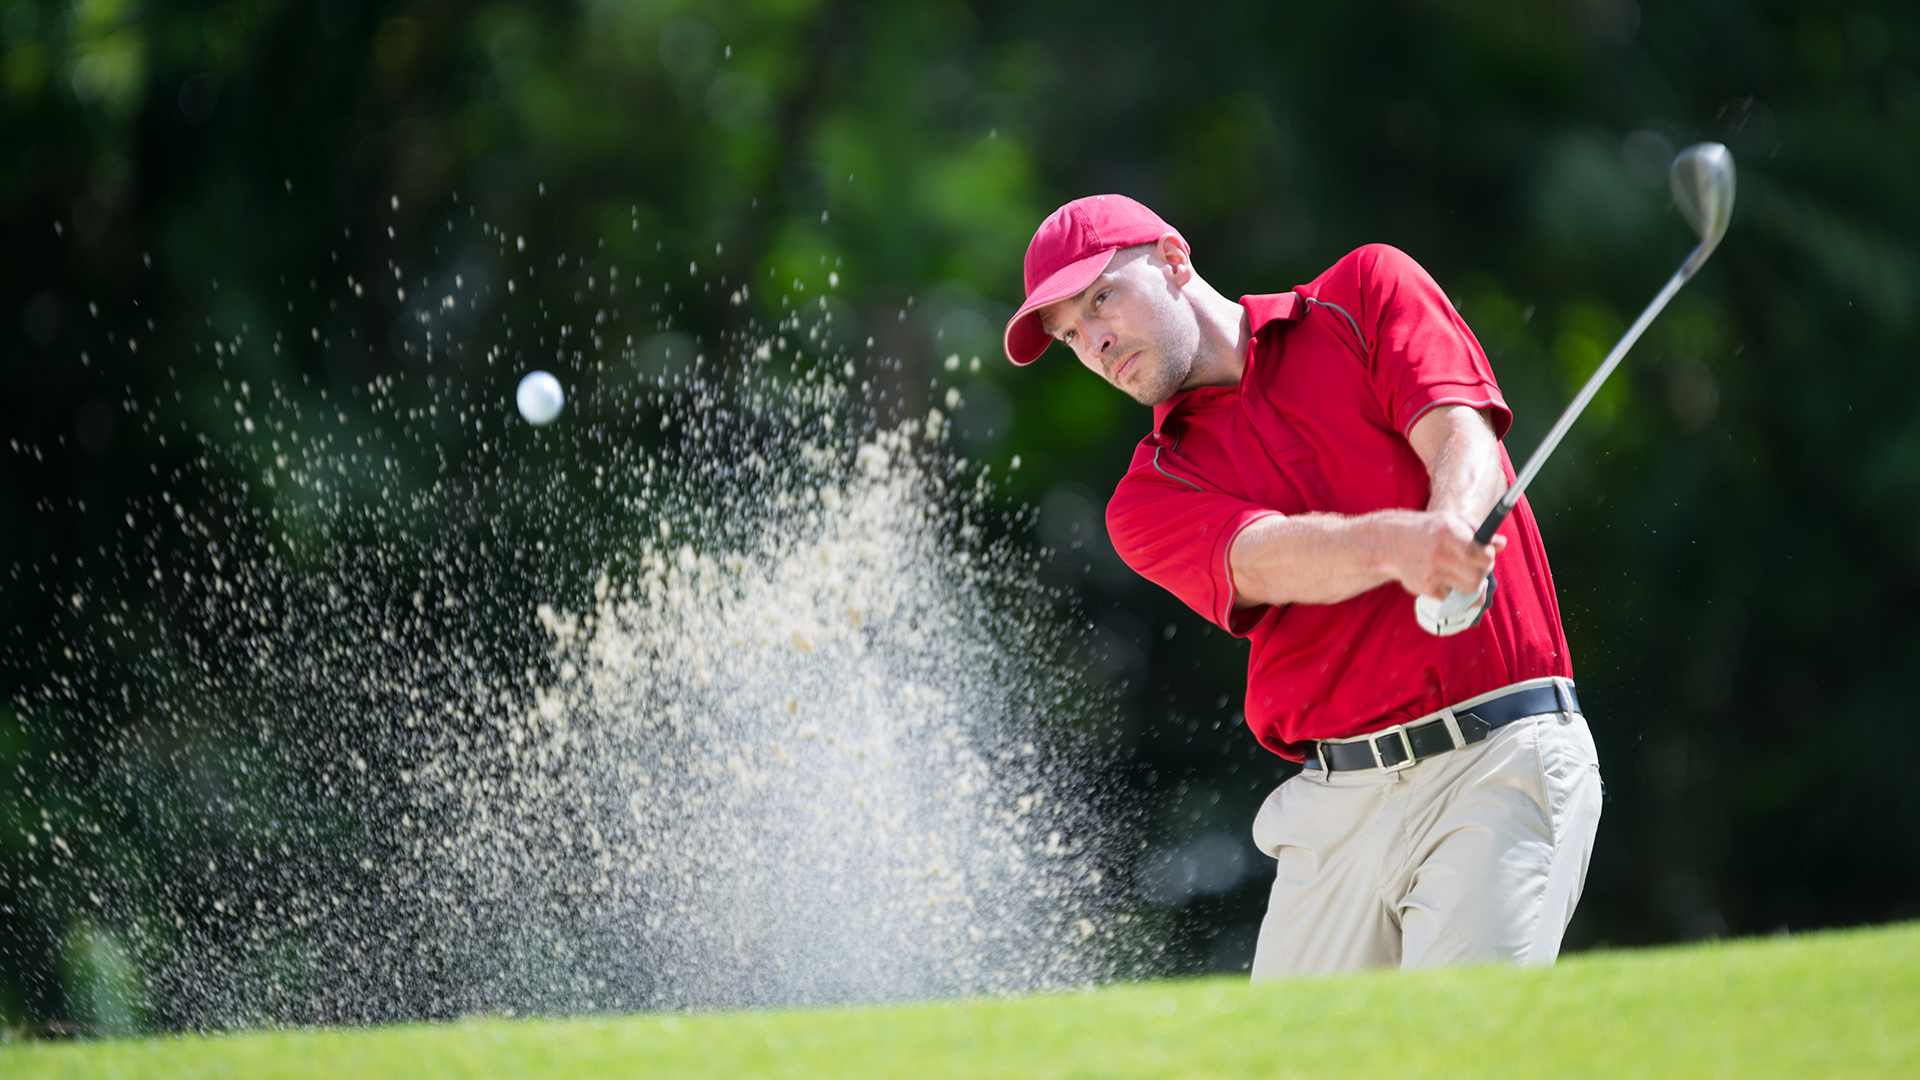 the cape club golfer in red shirt and hat hitting golf ball